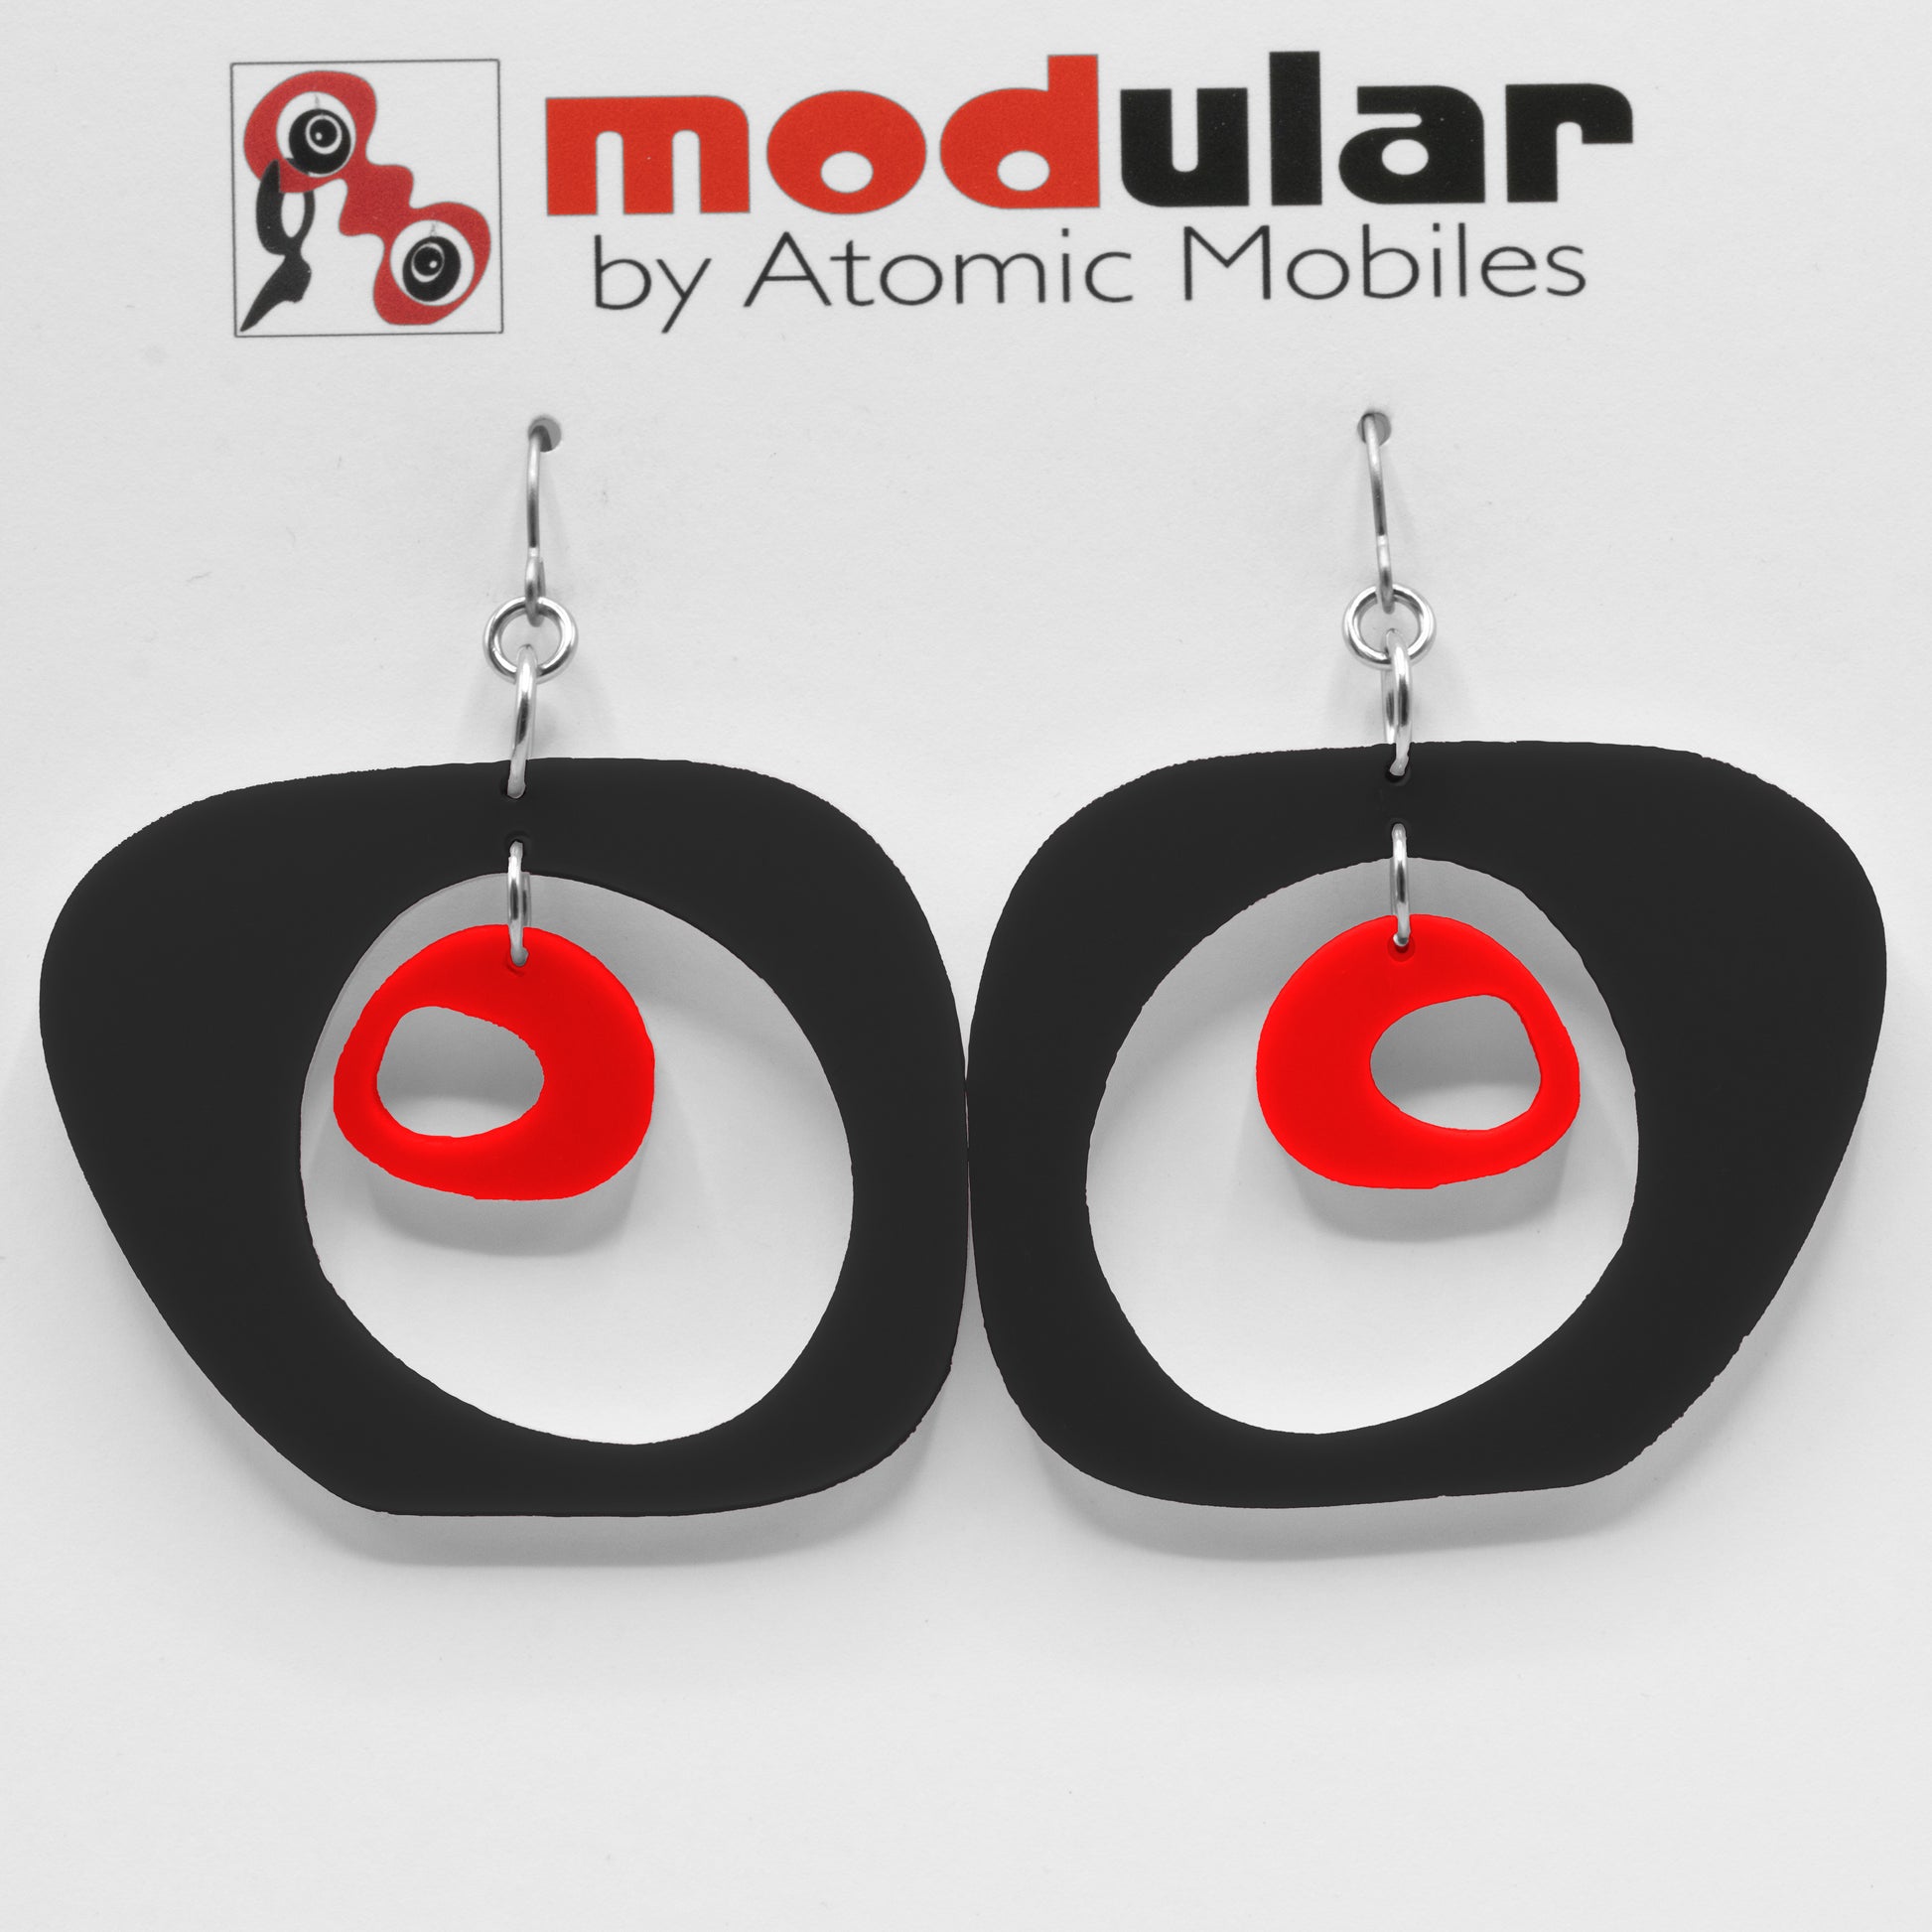 MODular Earrings - Paris Statement Earrings in Black and Red by AtomicMobiles.com - retro era inspired mod handmade jewelry